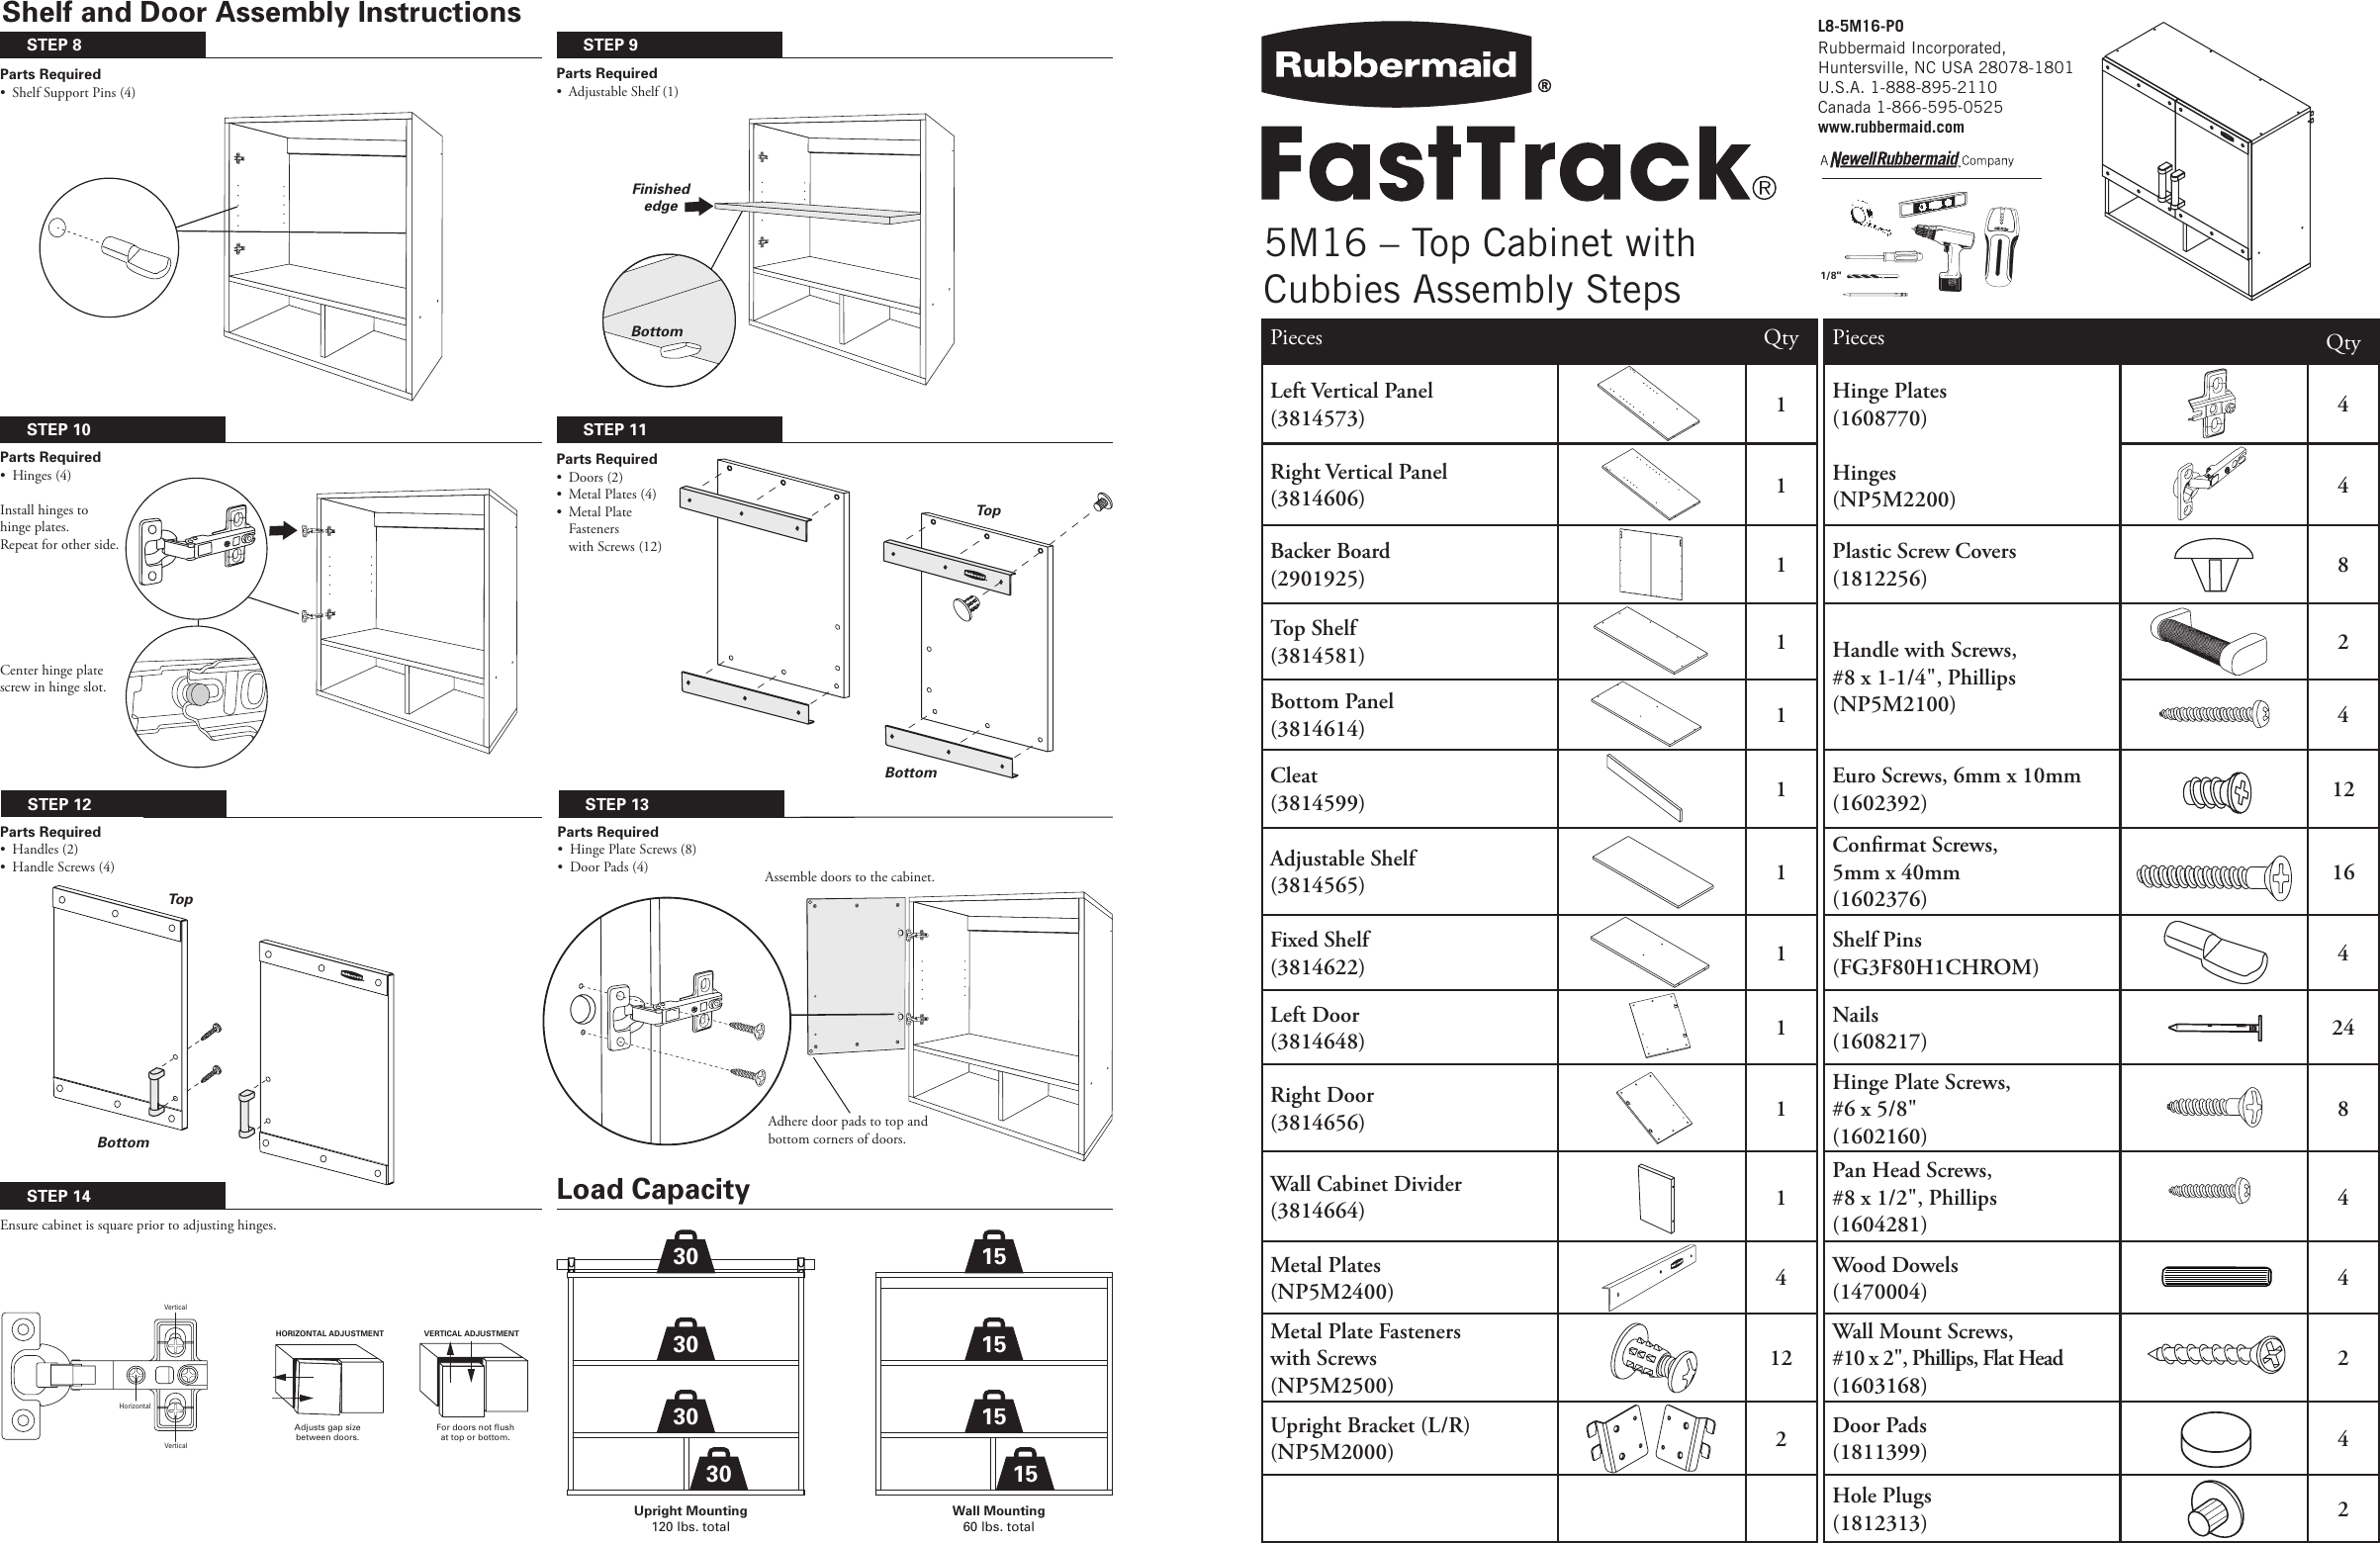 Rubbermaid Stereo System 5m16 Users Manual Fasttrack Wall Cabinet